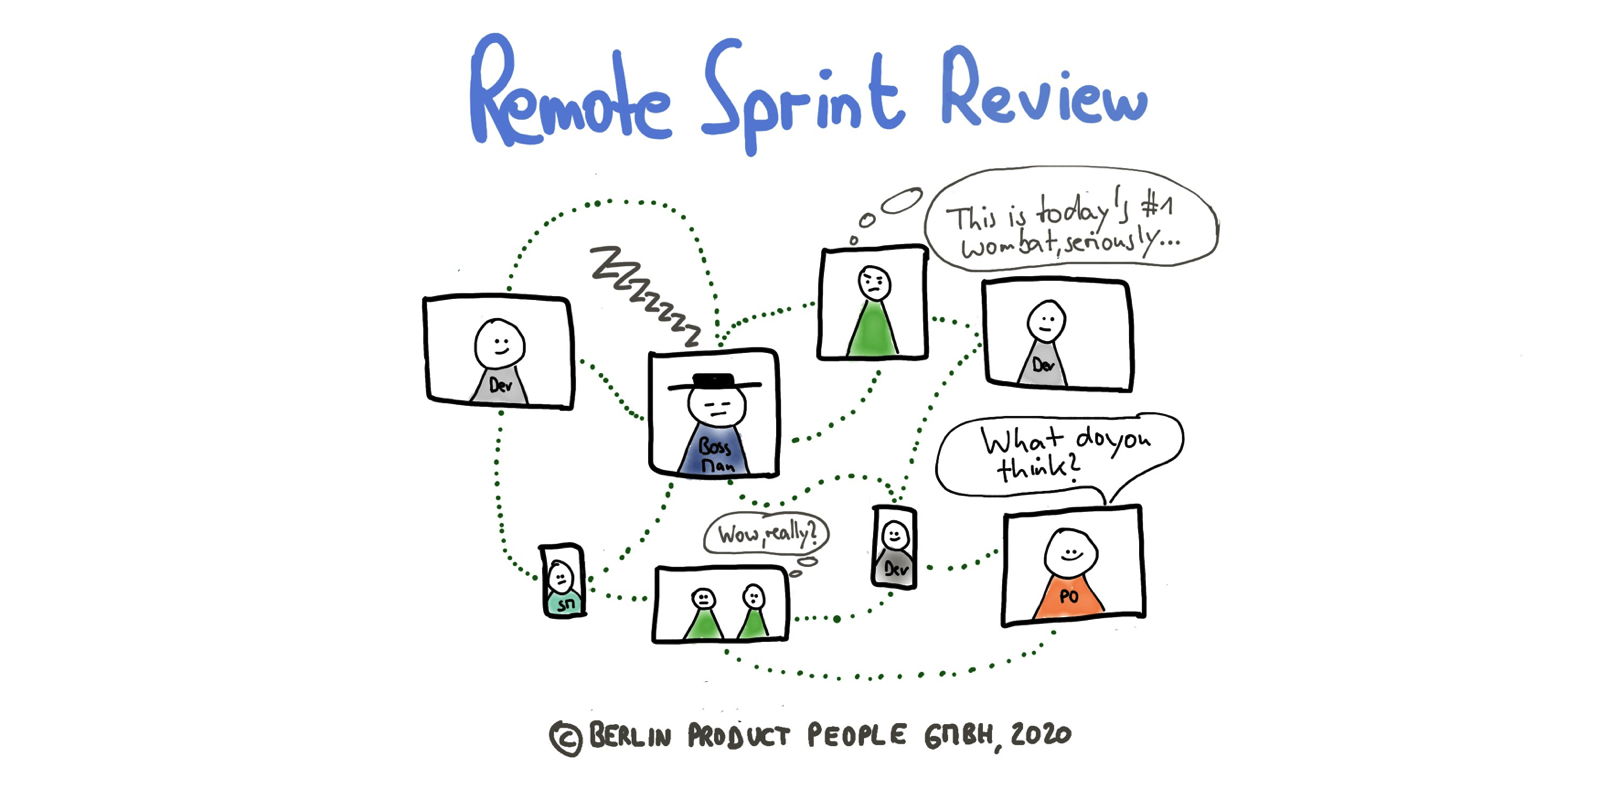 Remote Sprint review